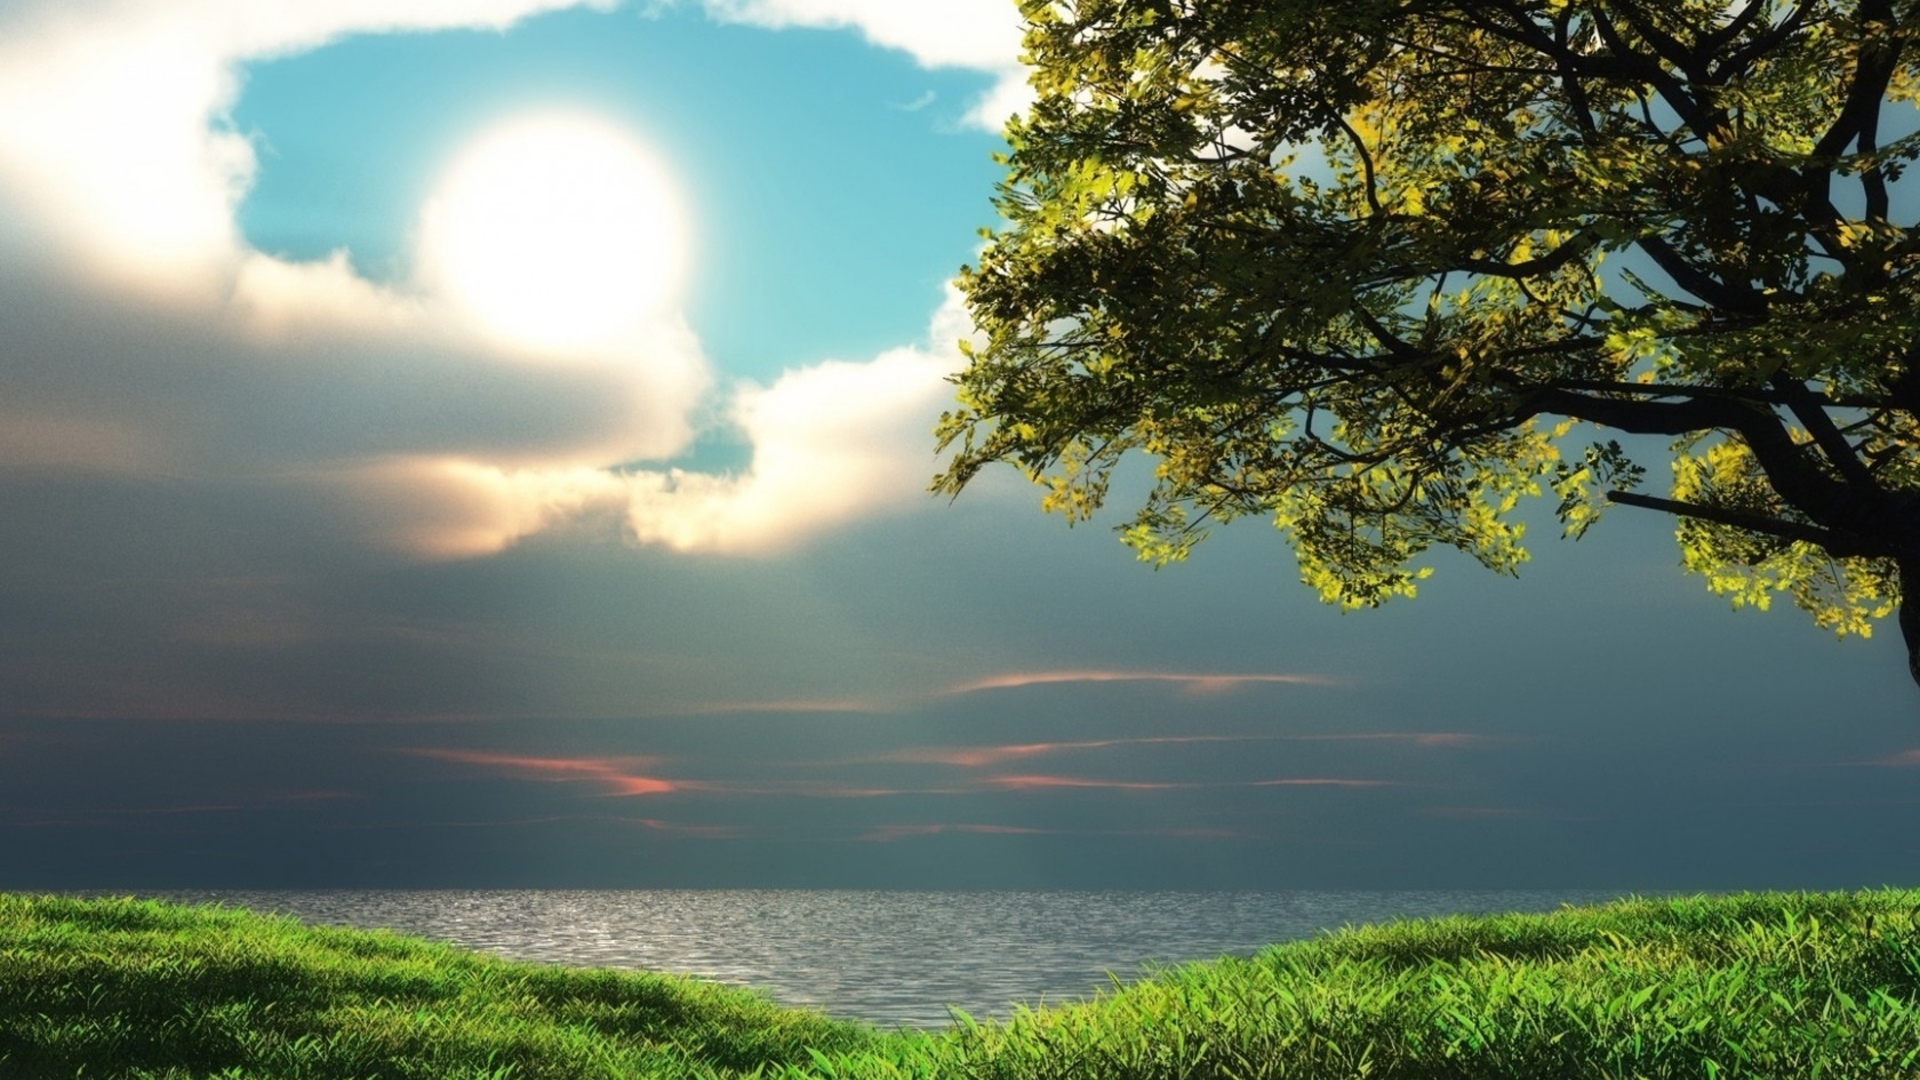 4534457 landscape, peaceful, nature, peace, anime - Rare Gallery HD  Wallpapers